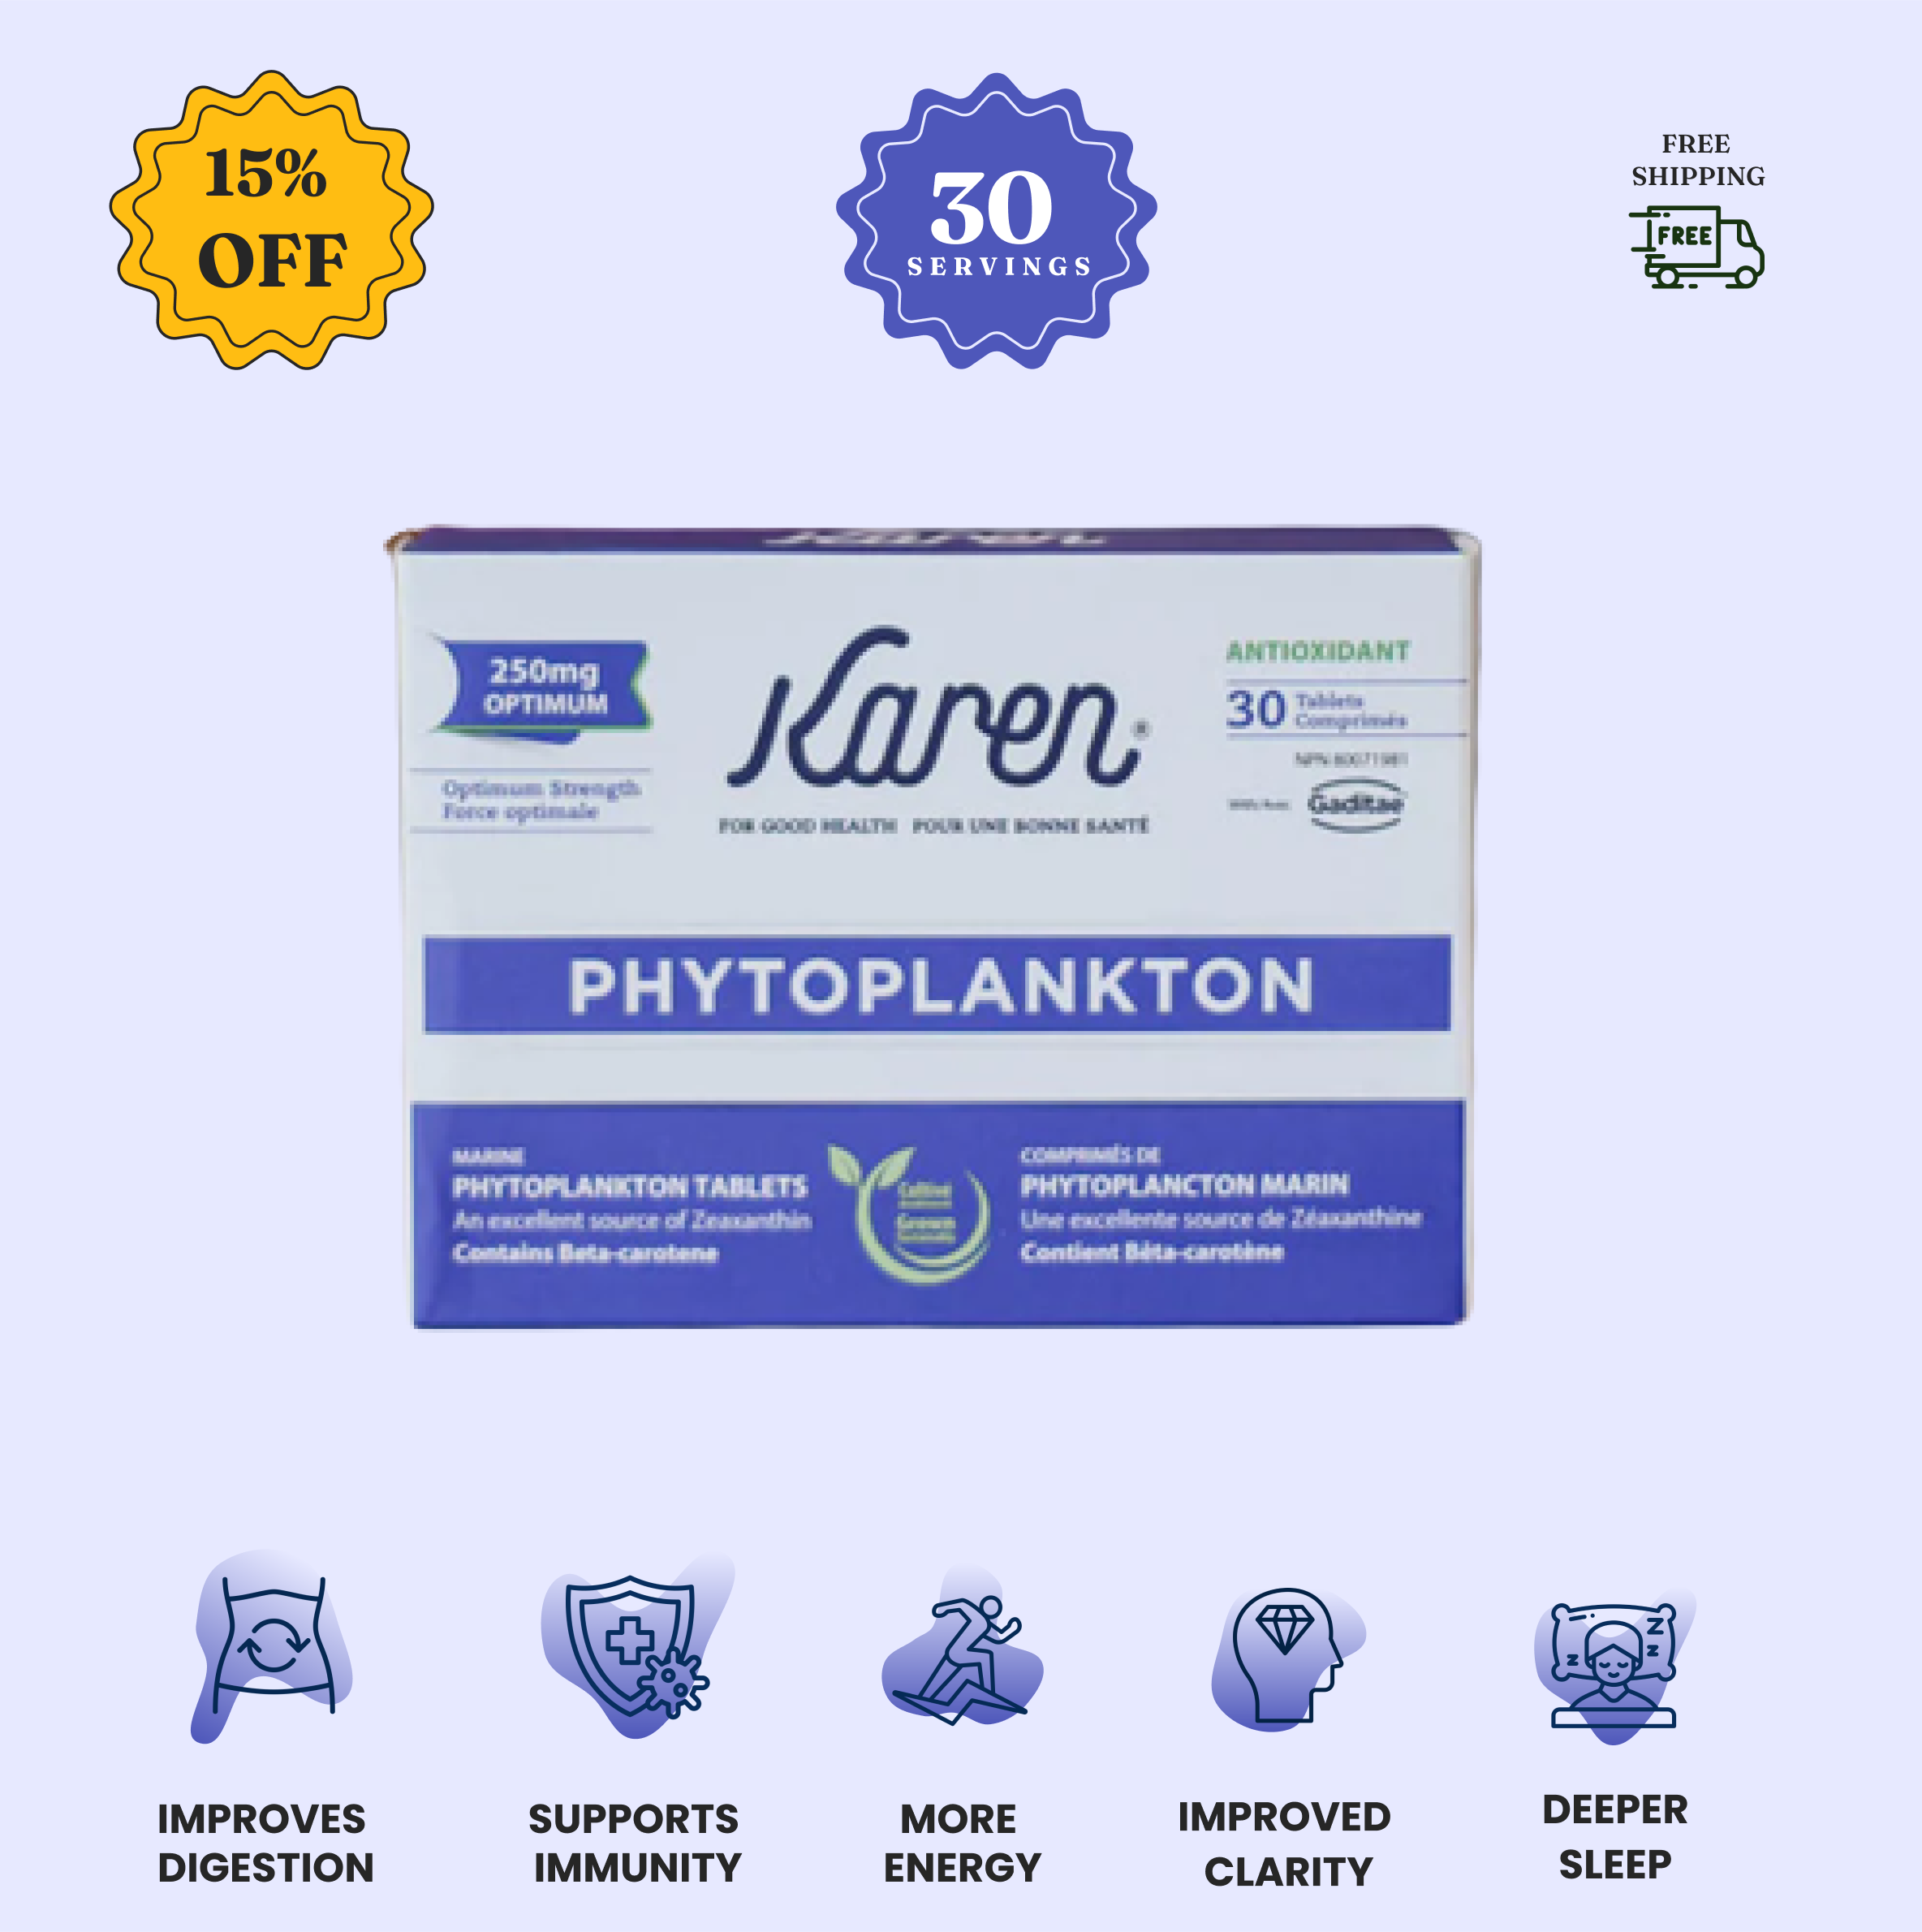 Box of Karen Phytoplankton tablets with health benefit icons and free shipping offer.